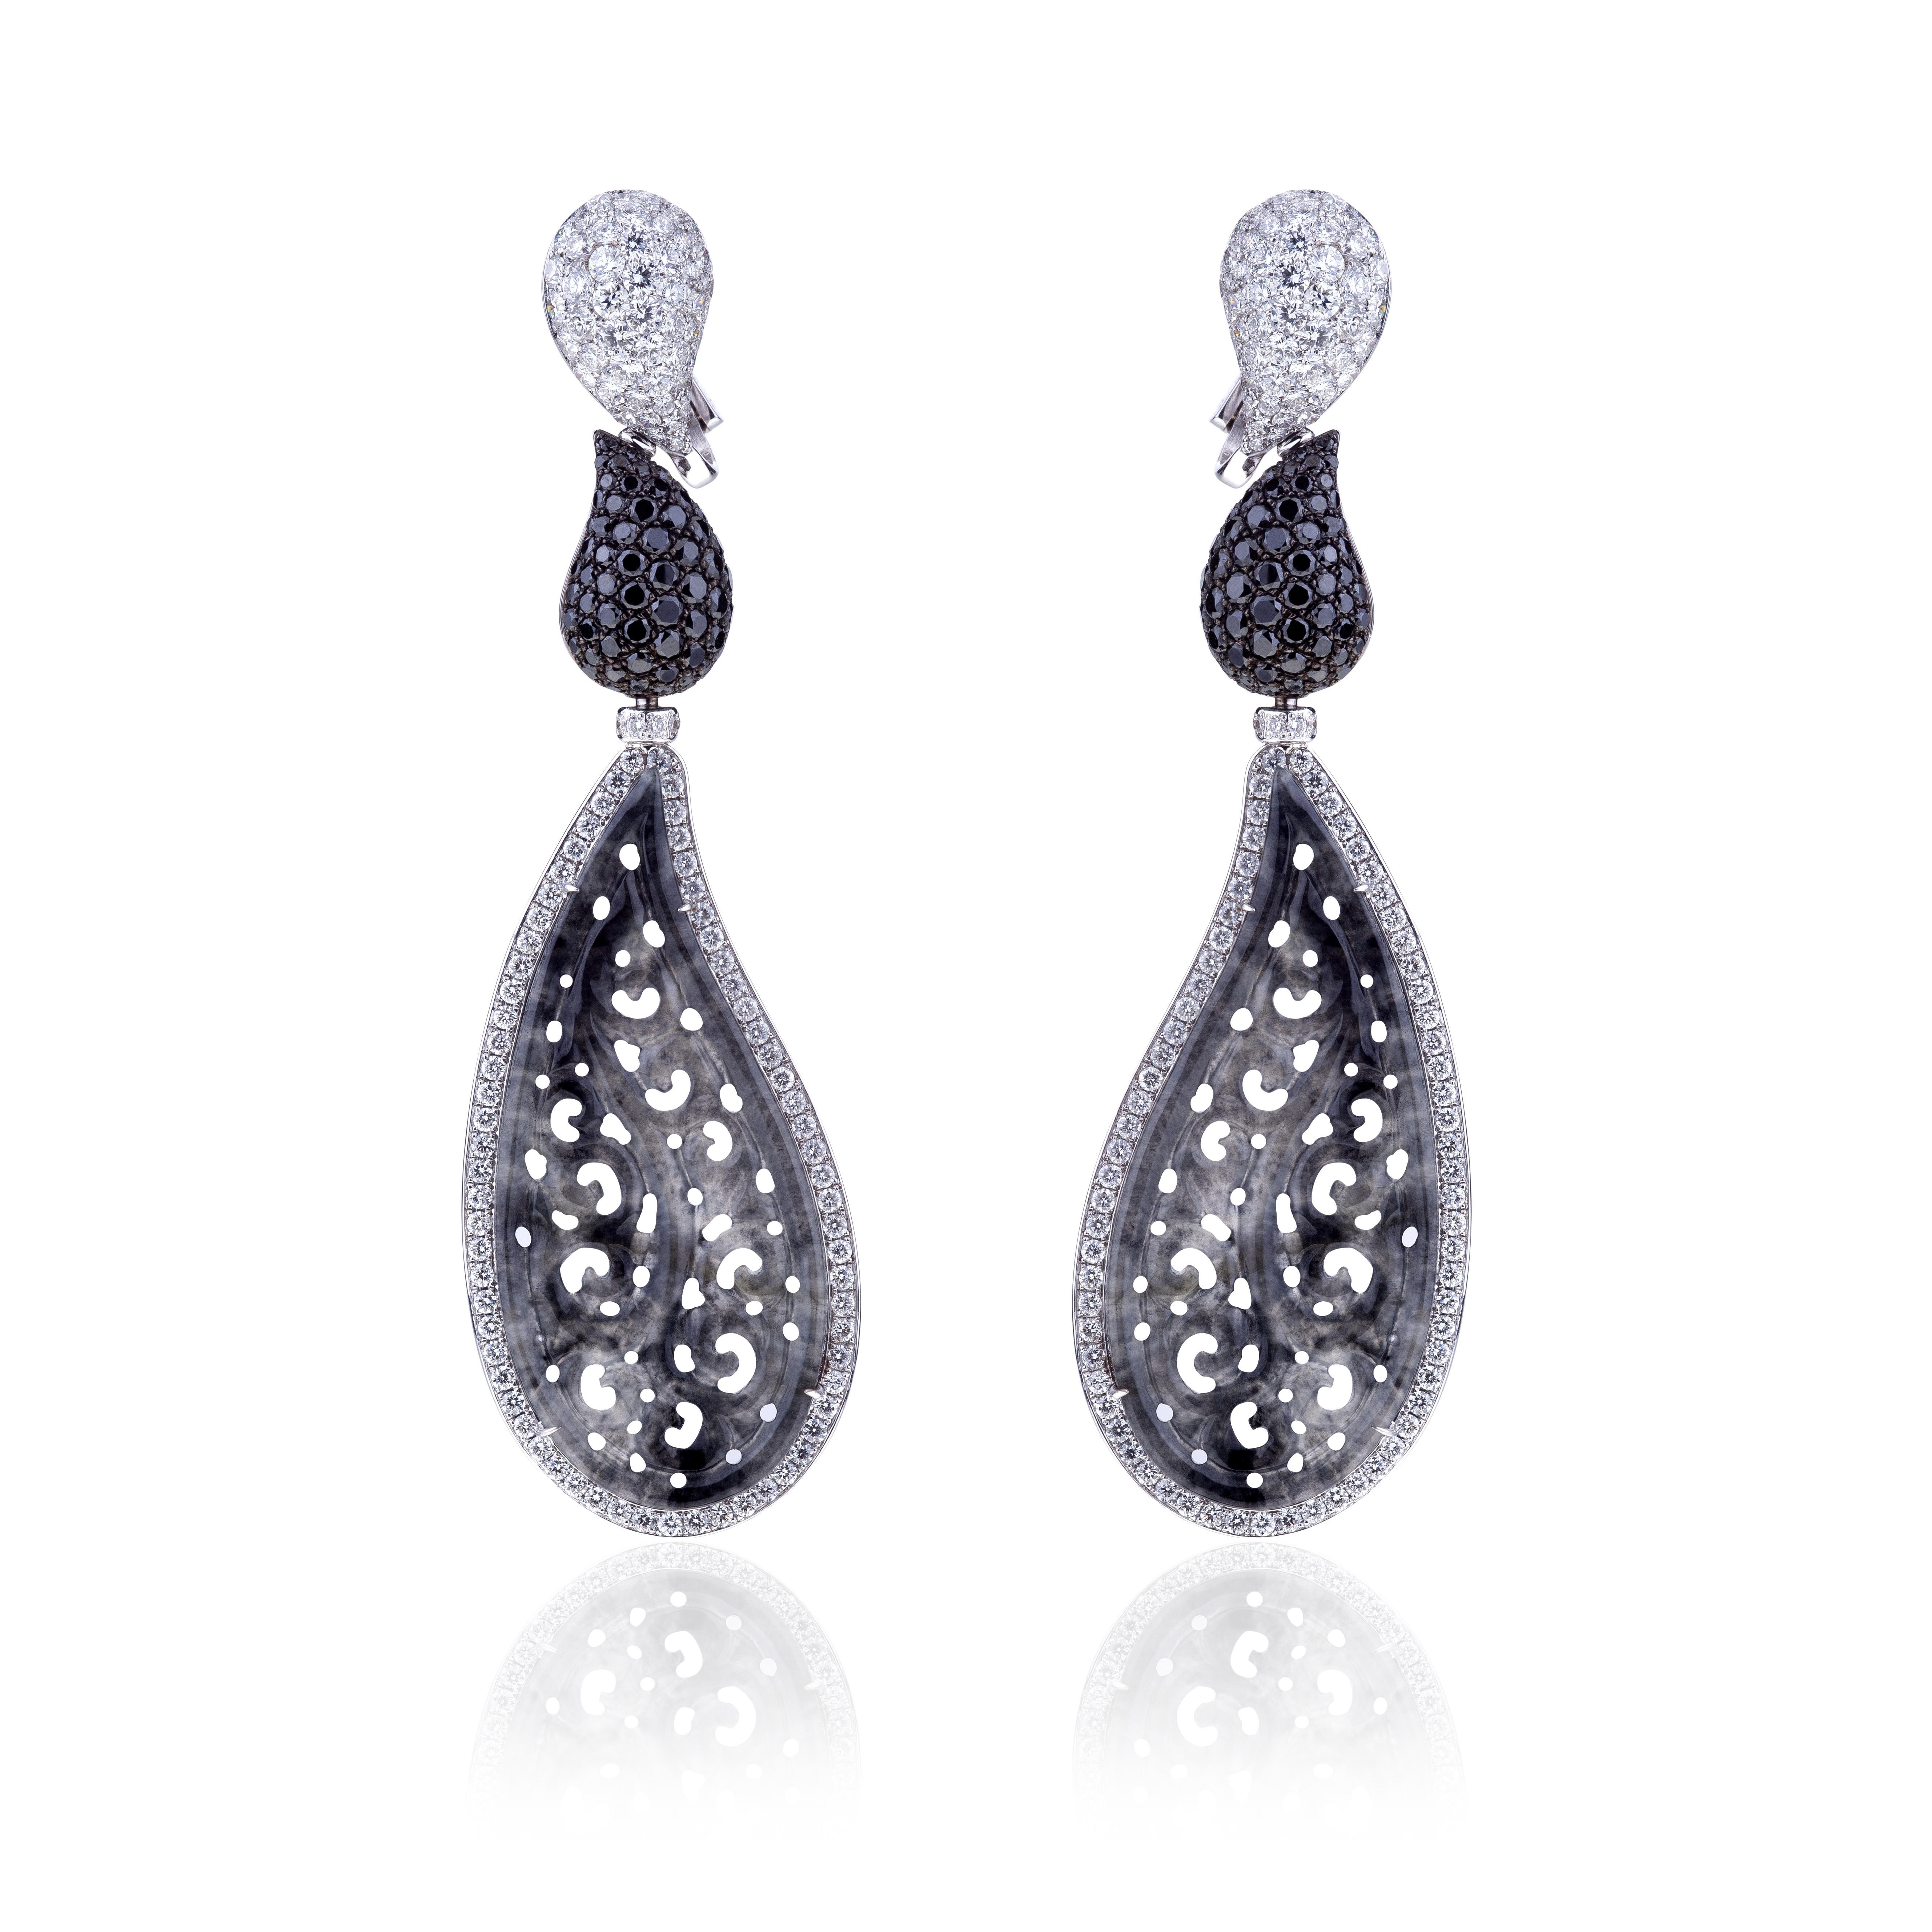 Angeletti Earrings White Gold, Carved Drop Translucent Black Jade And Black&White Diamonds.
The Live Tradition of Jadeite in a Contemporary Italian Design.
Tradition in Carved Jadeite, set in More Contemporary Design, Manifactured in Rome.